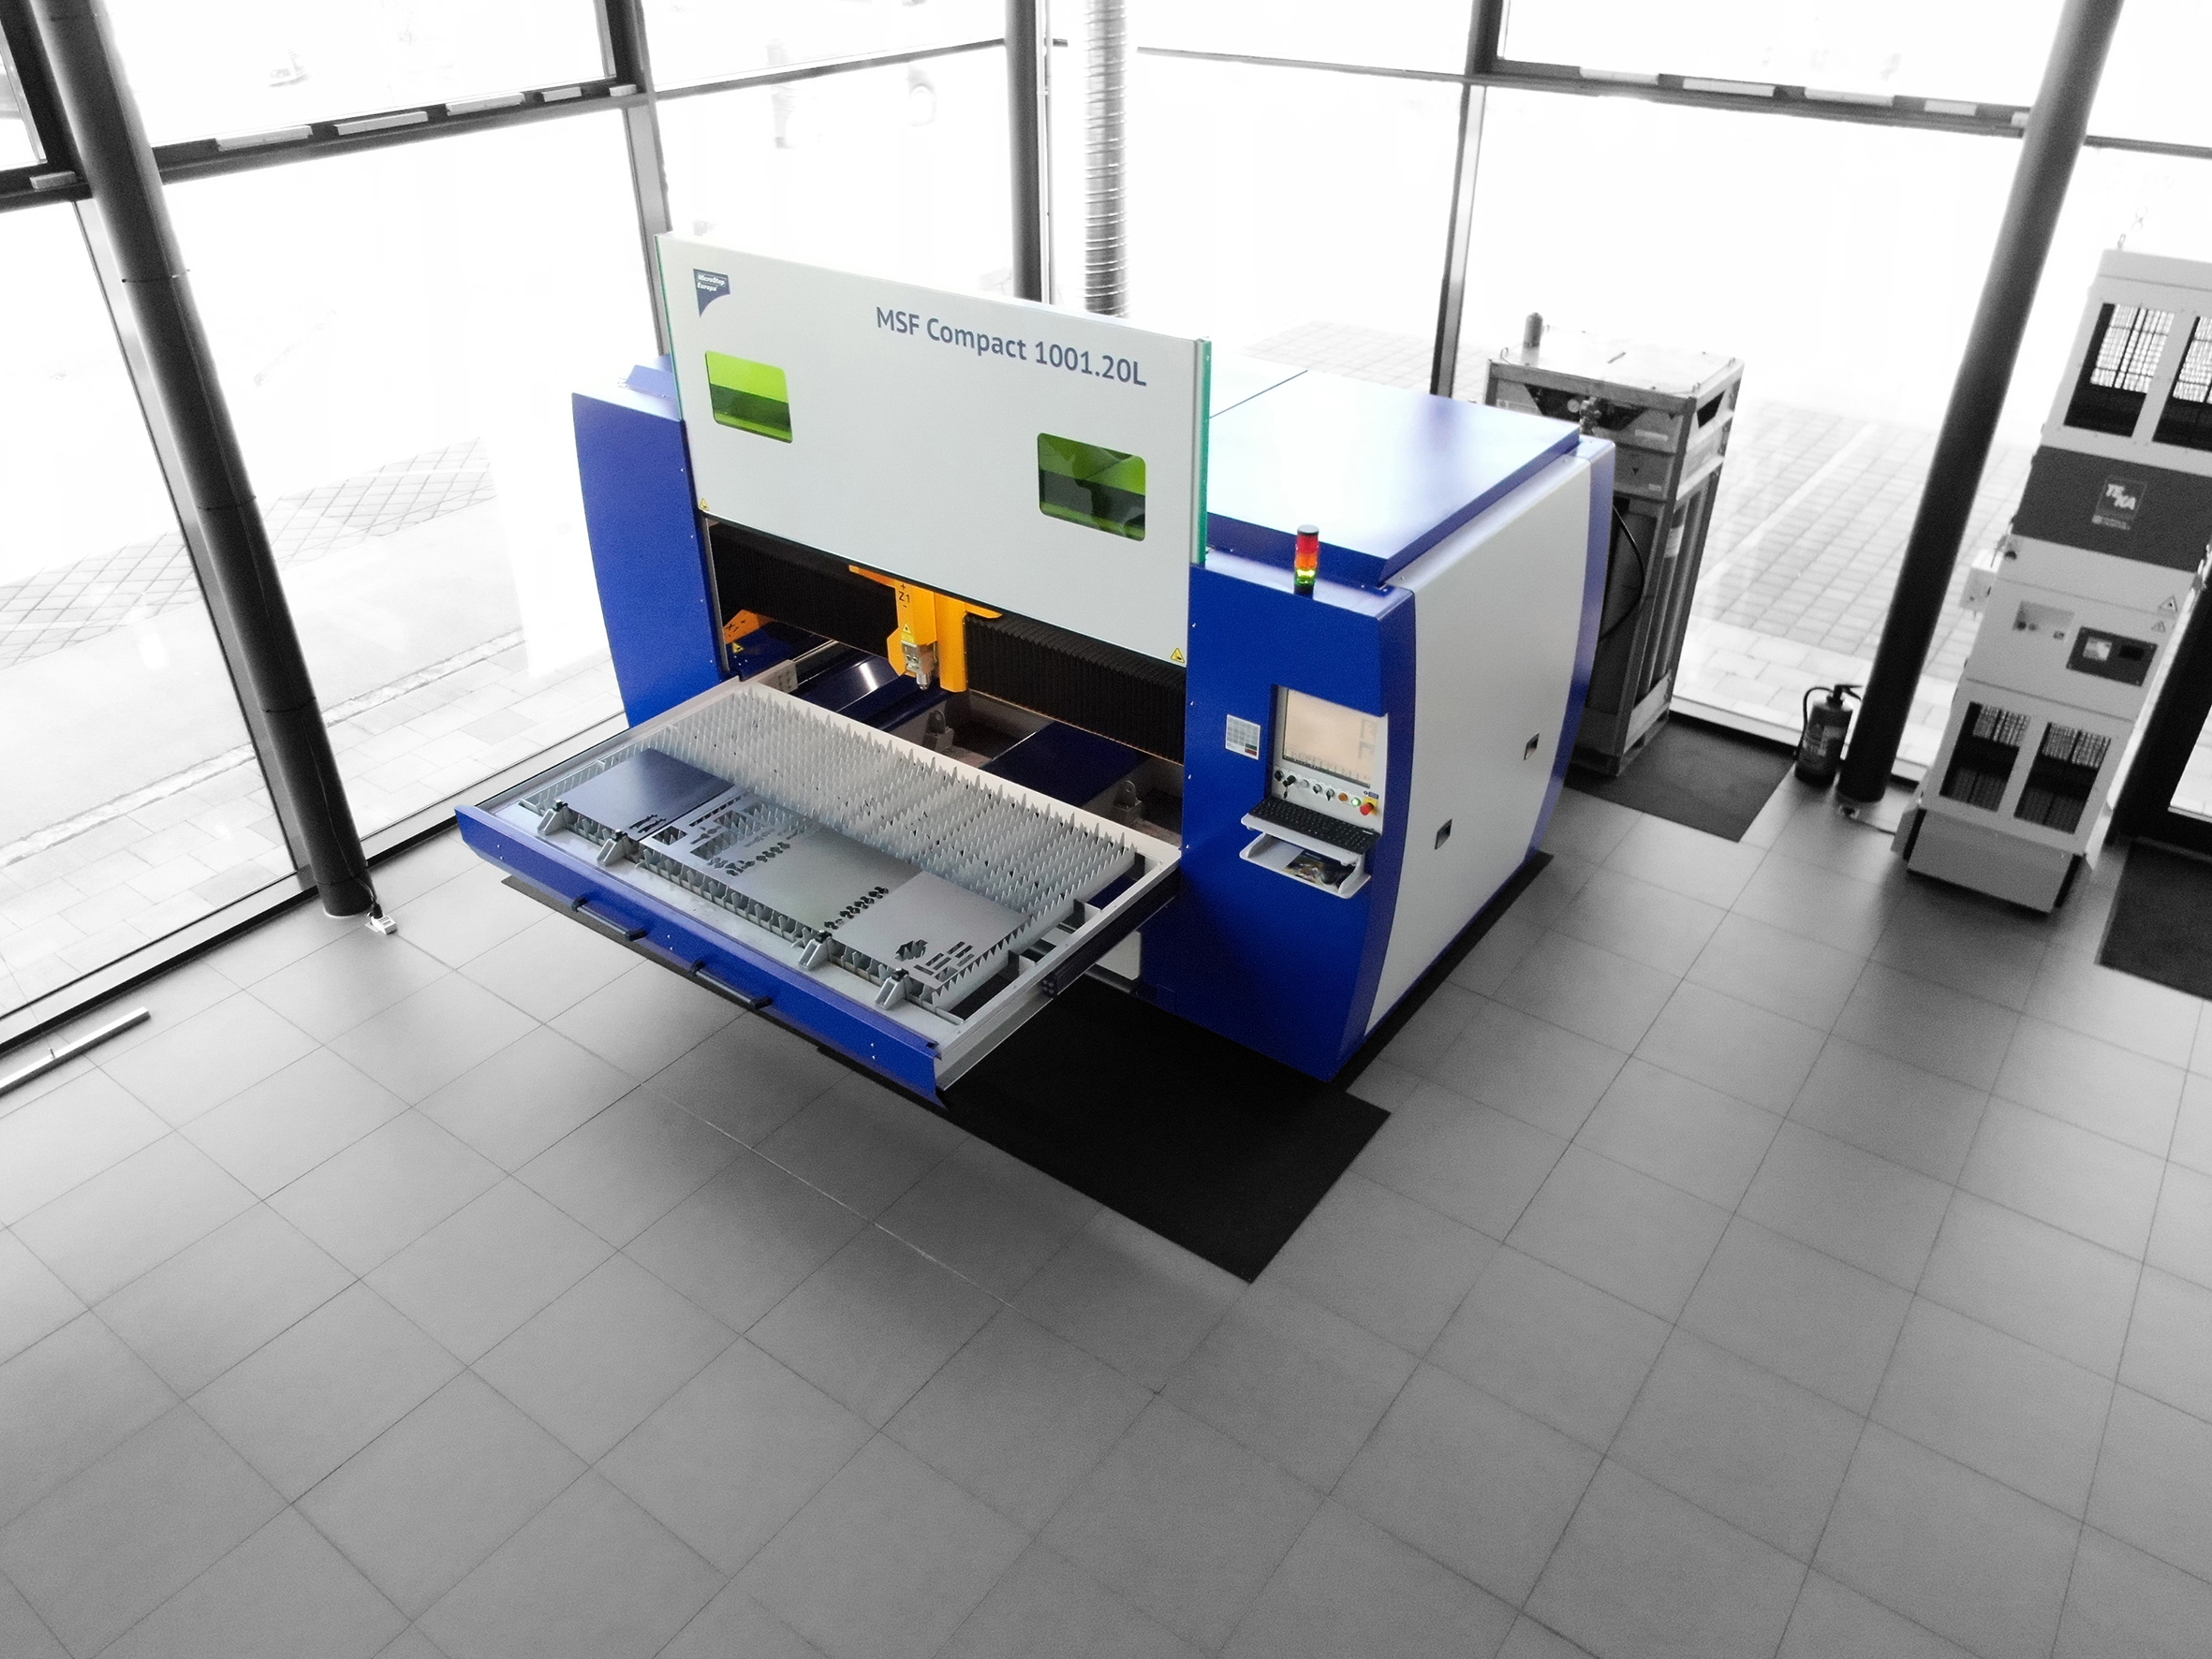 The MSF Compact can also be experienced at the MicroStep booth: the 2D laser combines speed and precision with an extremely small footprint. © MicroStep Europe GmbH